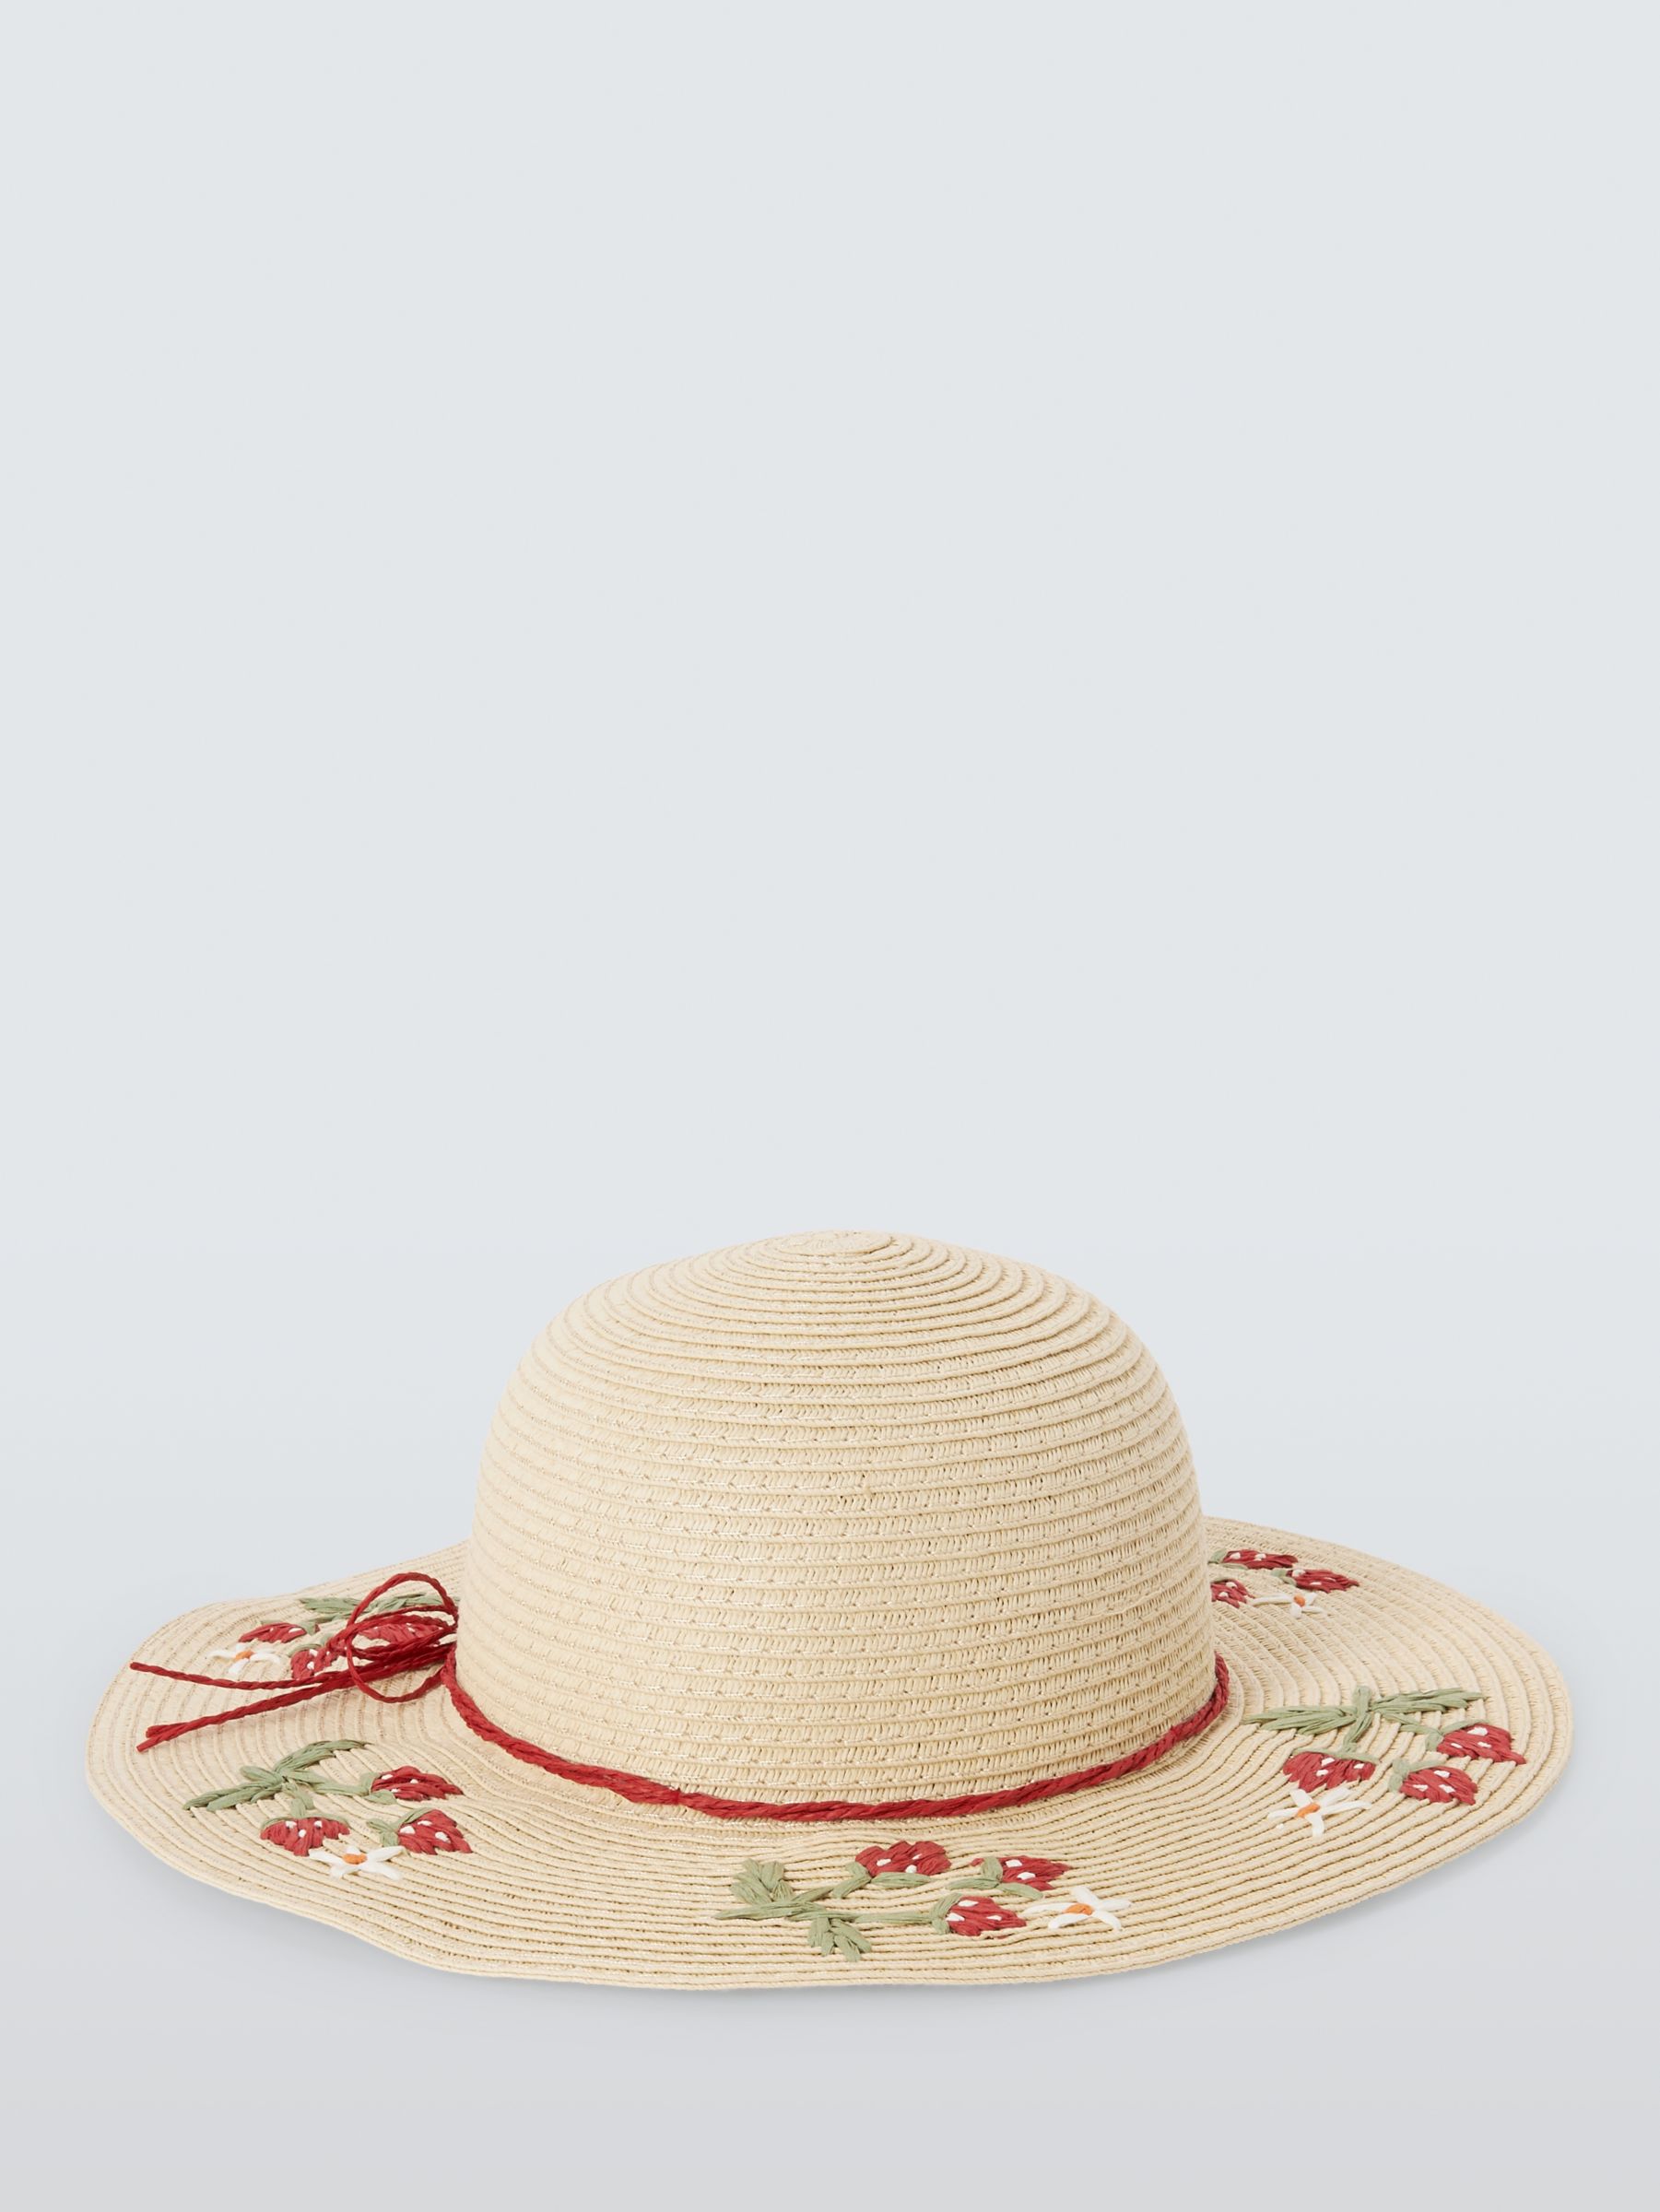 John Lewis Kids' Embroided Strawberry Straw Hat, Neutral, 9-12 years